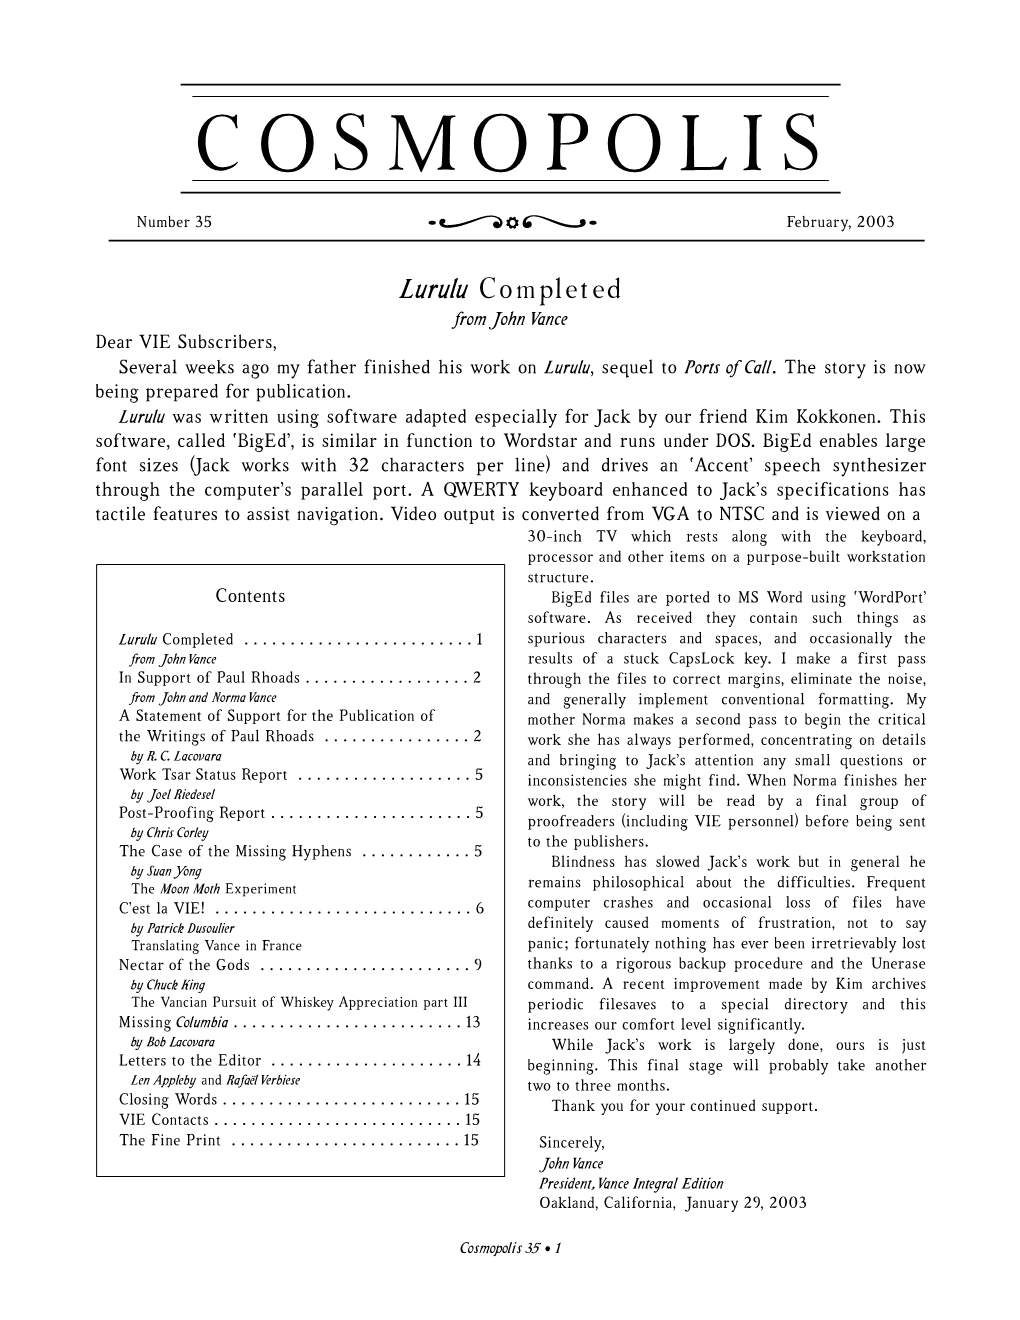 Cosmopolis 35 a 1 Gist of the Exchanges Has Ranged Over a Variety of Topics, in Support of Paul Rhoads Including a Typeface Called Amiante That Mr